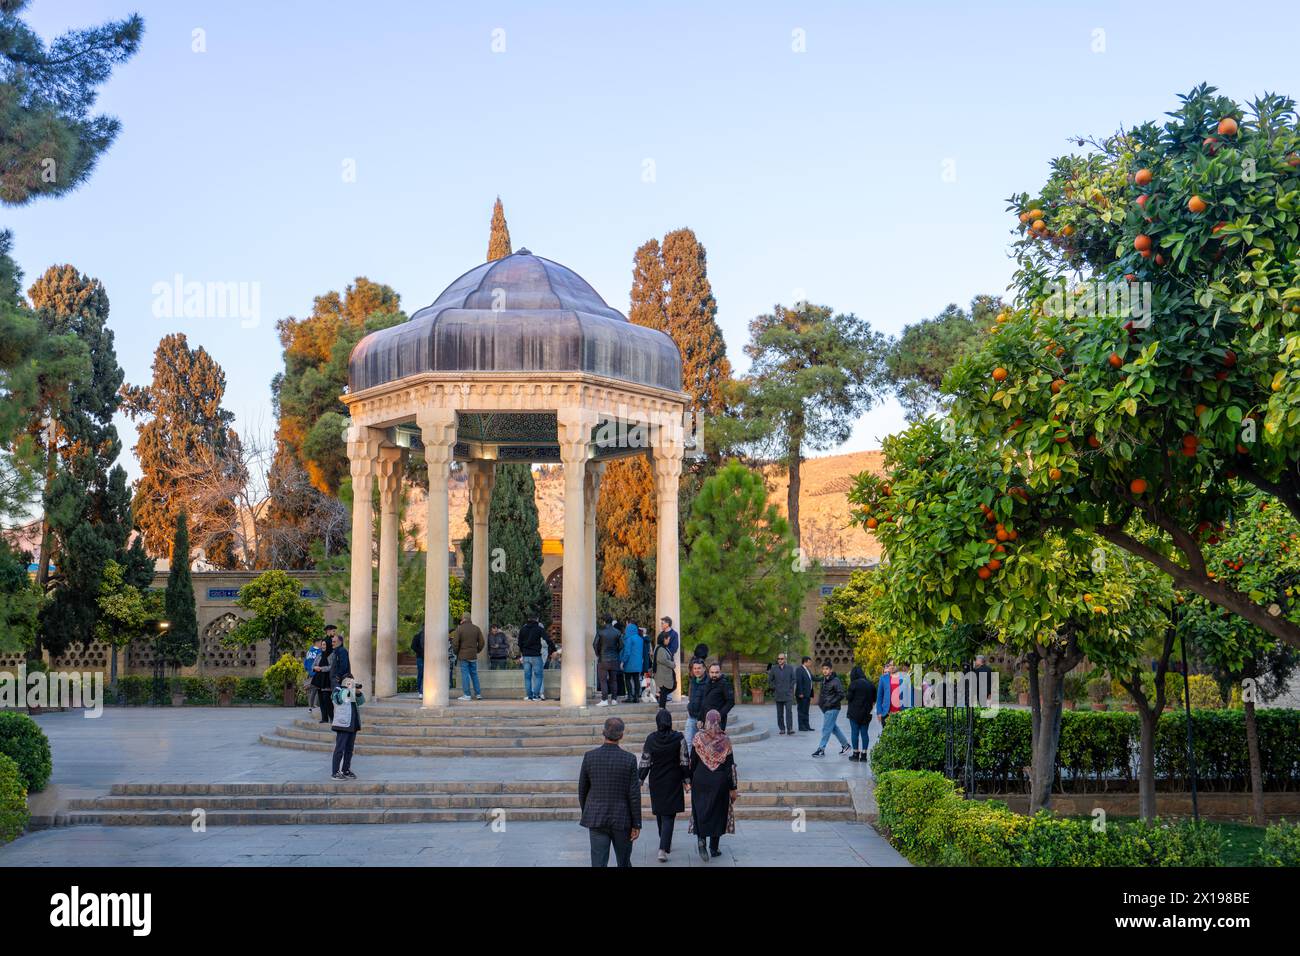 Mausoleum of Sa’di, Iran - March 1, 2024: The elegant tomb of Sa’di, the greatest poet of classical Persian literature, known for his eloquent and uni Stock Photo